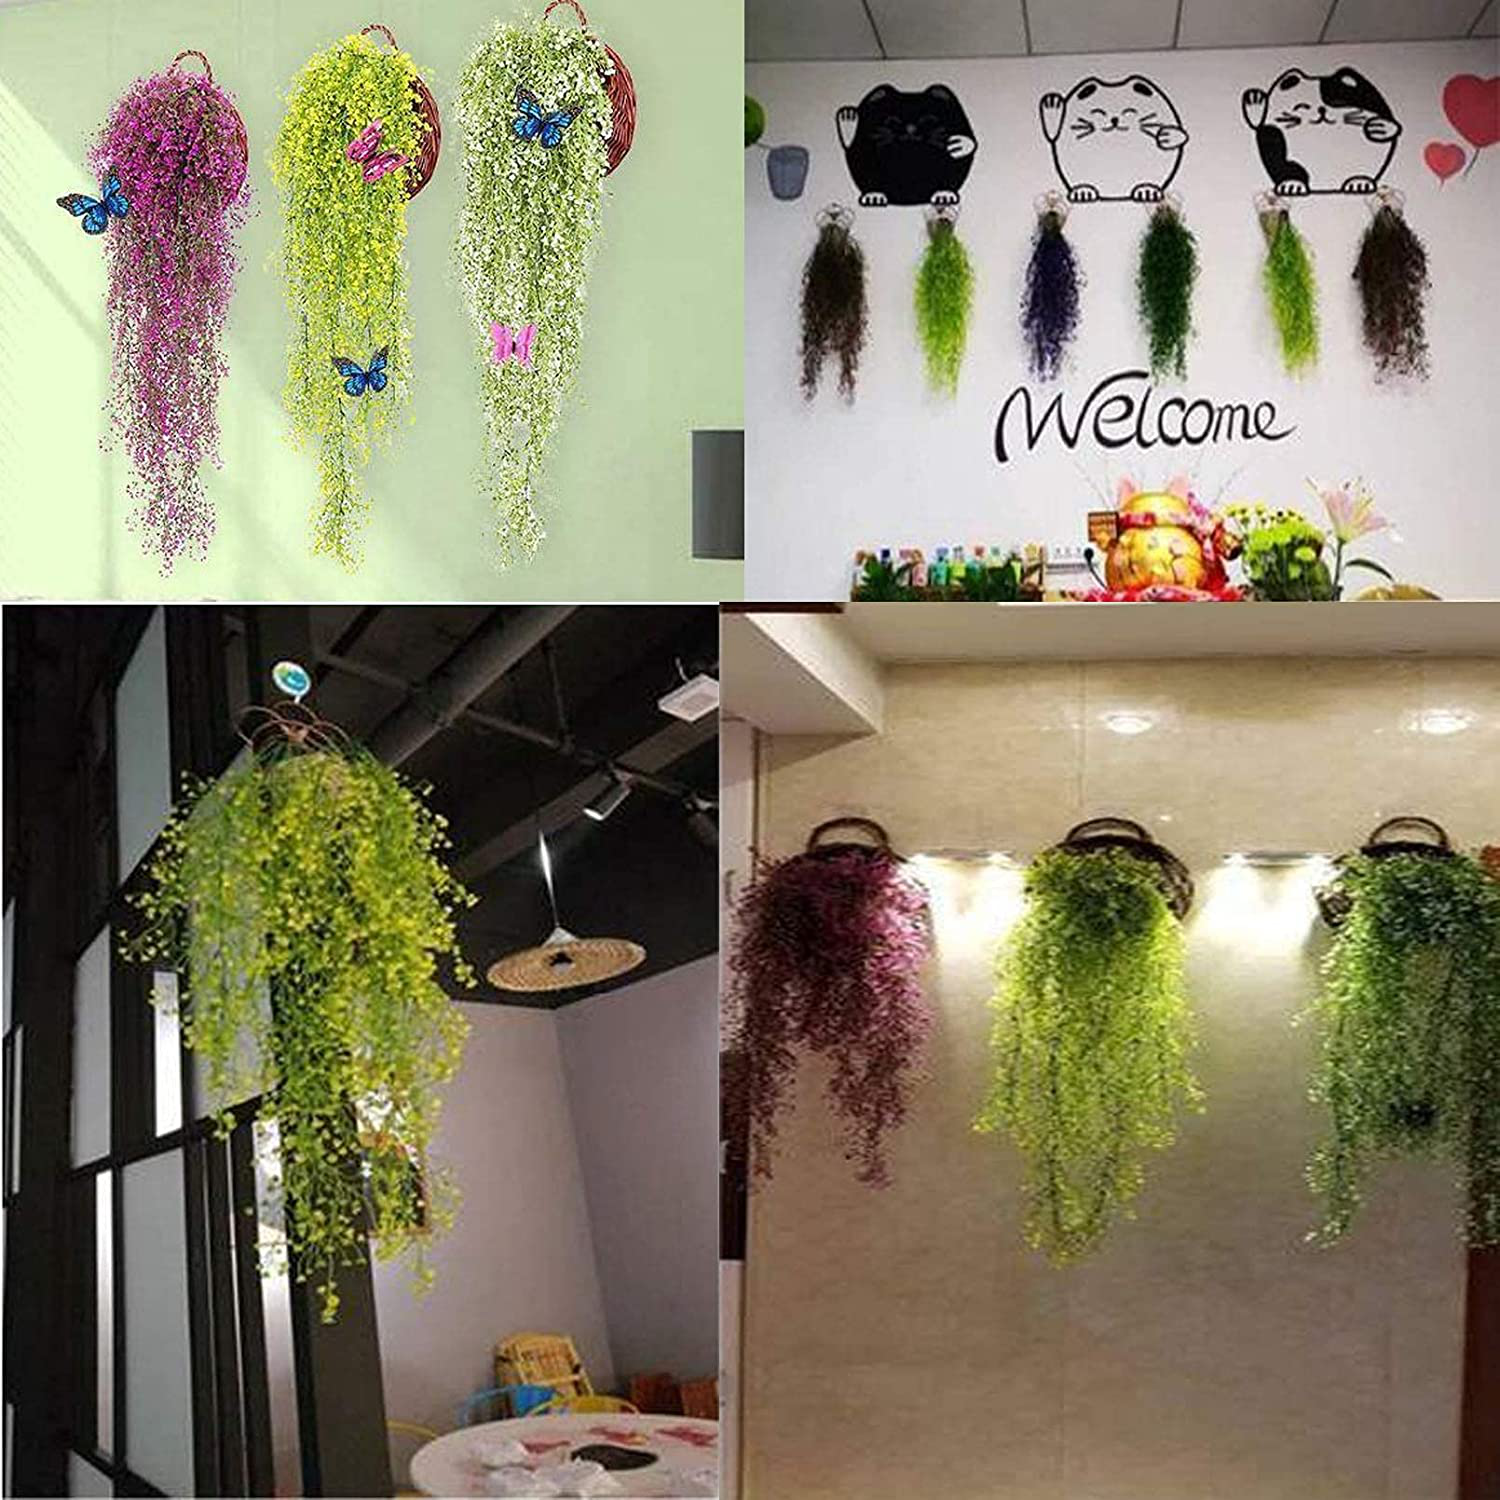 Hamiledyi Reptile Plants Hanging Fake Vines Climbing Terrarium Plant Kit with Suction Cup Amphibian Tank Habitat Decorations for Hermit Crabs Snakes Bearded Dragons Chameleons Frogs Lizards Geckos Animals & Pet Supplies > Pet Supplies > Reptile & Amphibian Supplies > Reptile & Amphibian Habitat Accessories Hamiledyi   